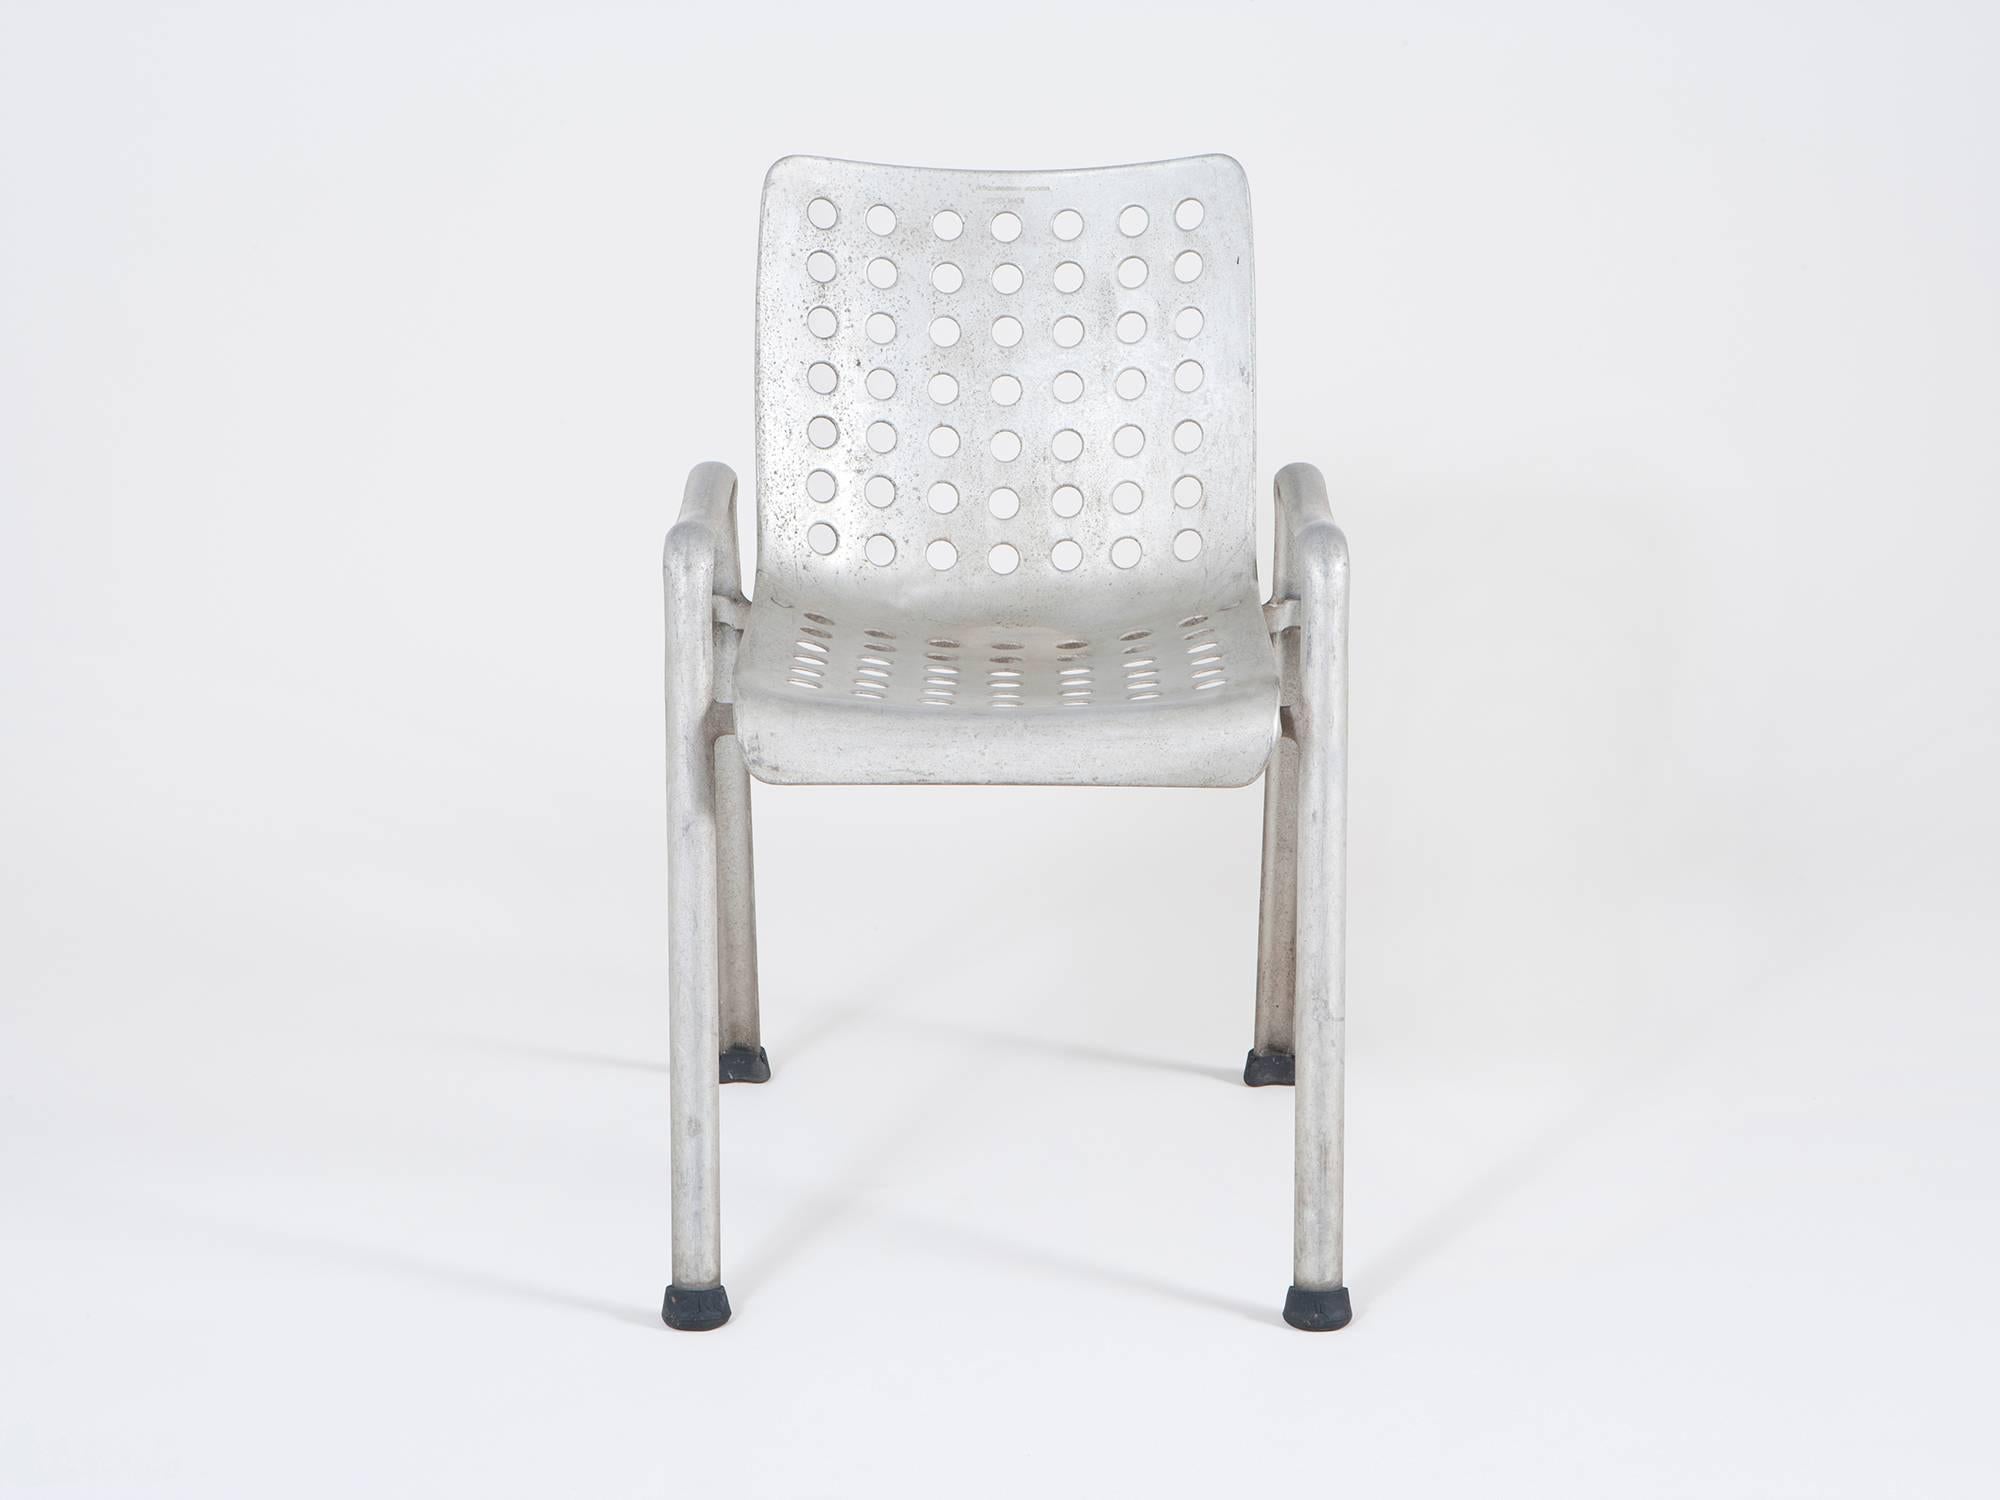 Modernist aluminum chair designed by Hans Coray in 1938 for the Swiss National Exhibition of 1939 and fabricated by the original manufacturer, MEWA. This is an early 